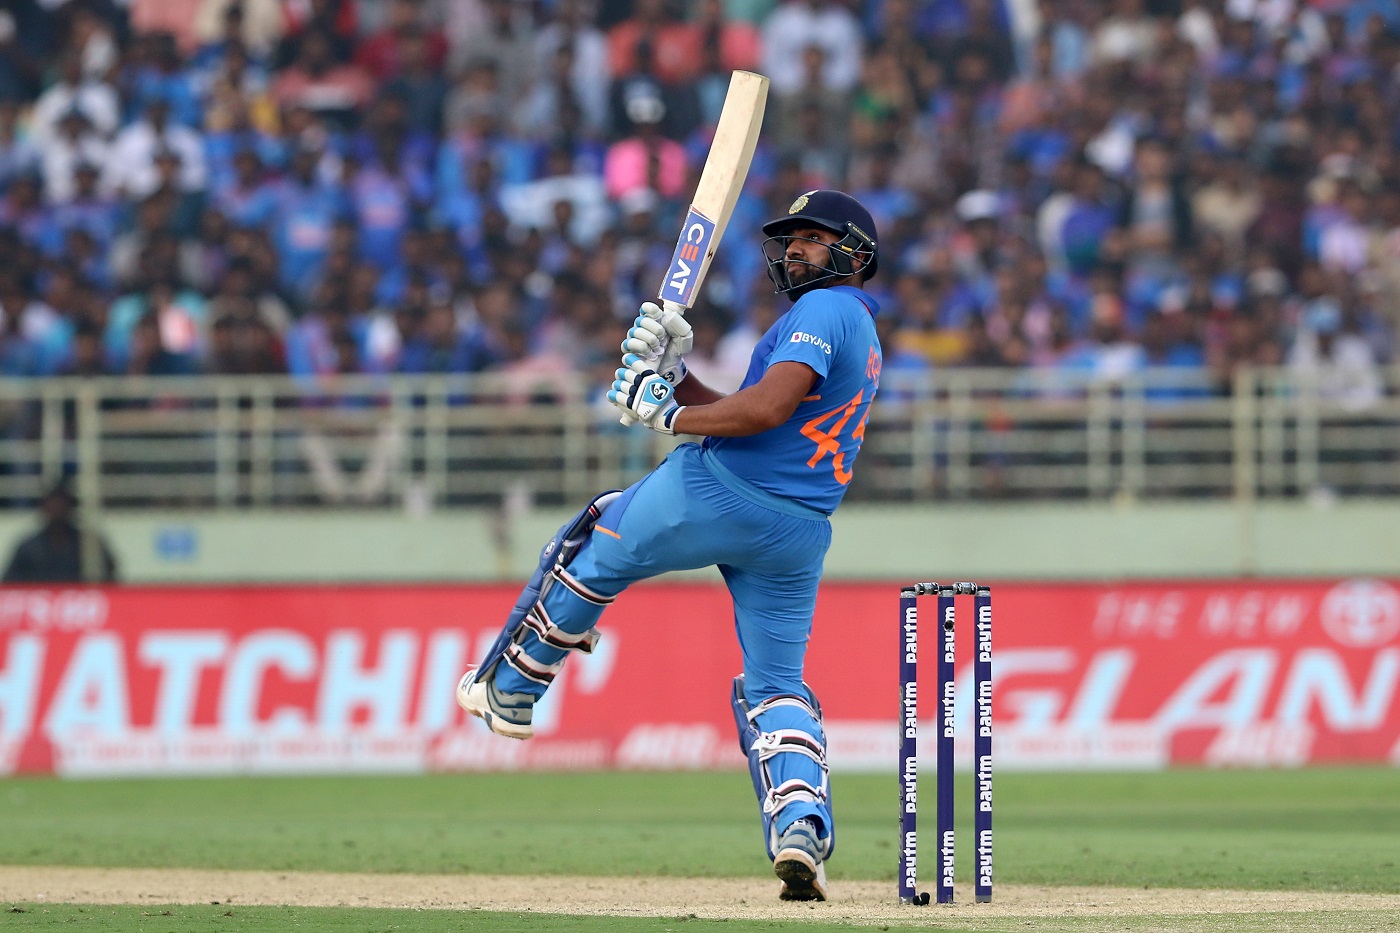 India vs West Indies Records that Rohit Sharma broke in 2nd ODI